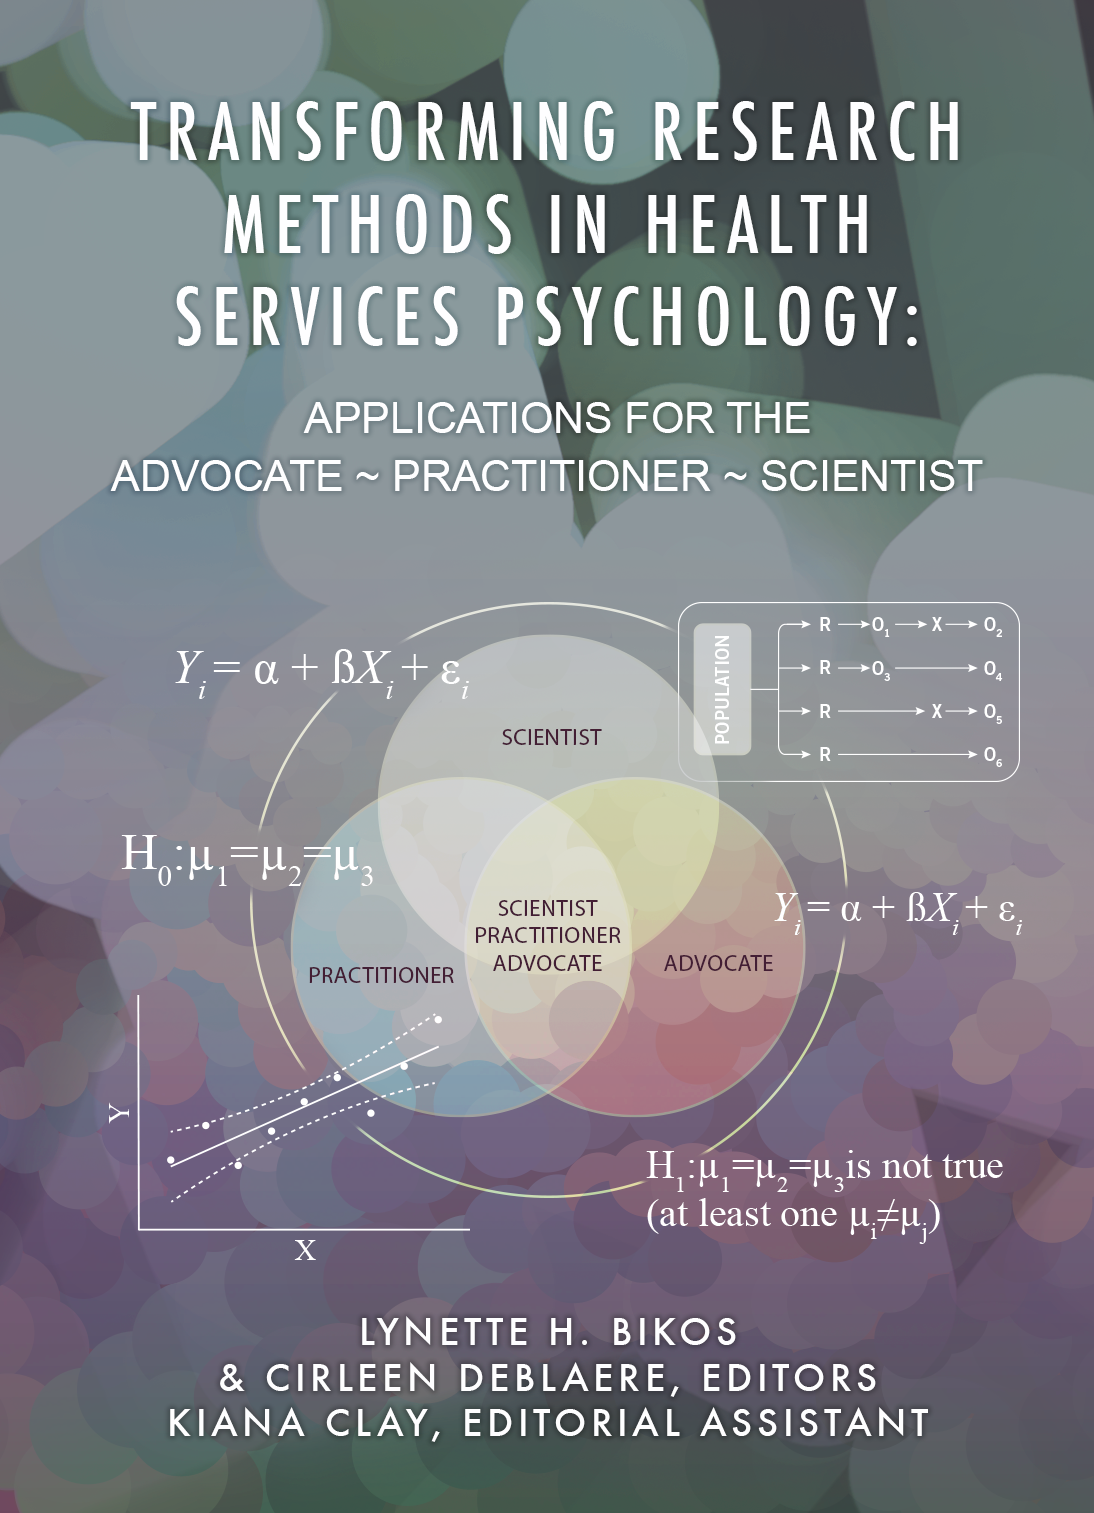 An image of the book cover. It includes three overlapping, pastel-colored, circles representing advocacy, practice, and science. These are surrounded by a handful of statistical symbols and formulae. methods.